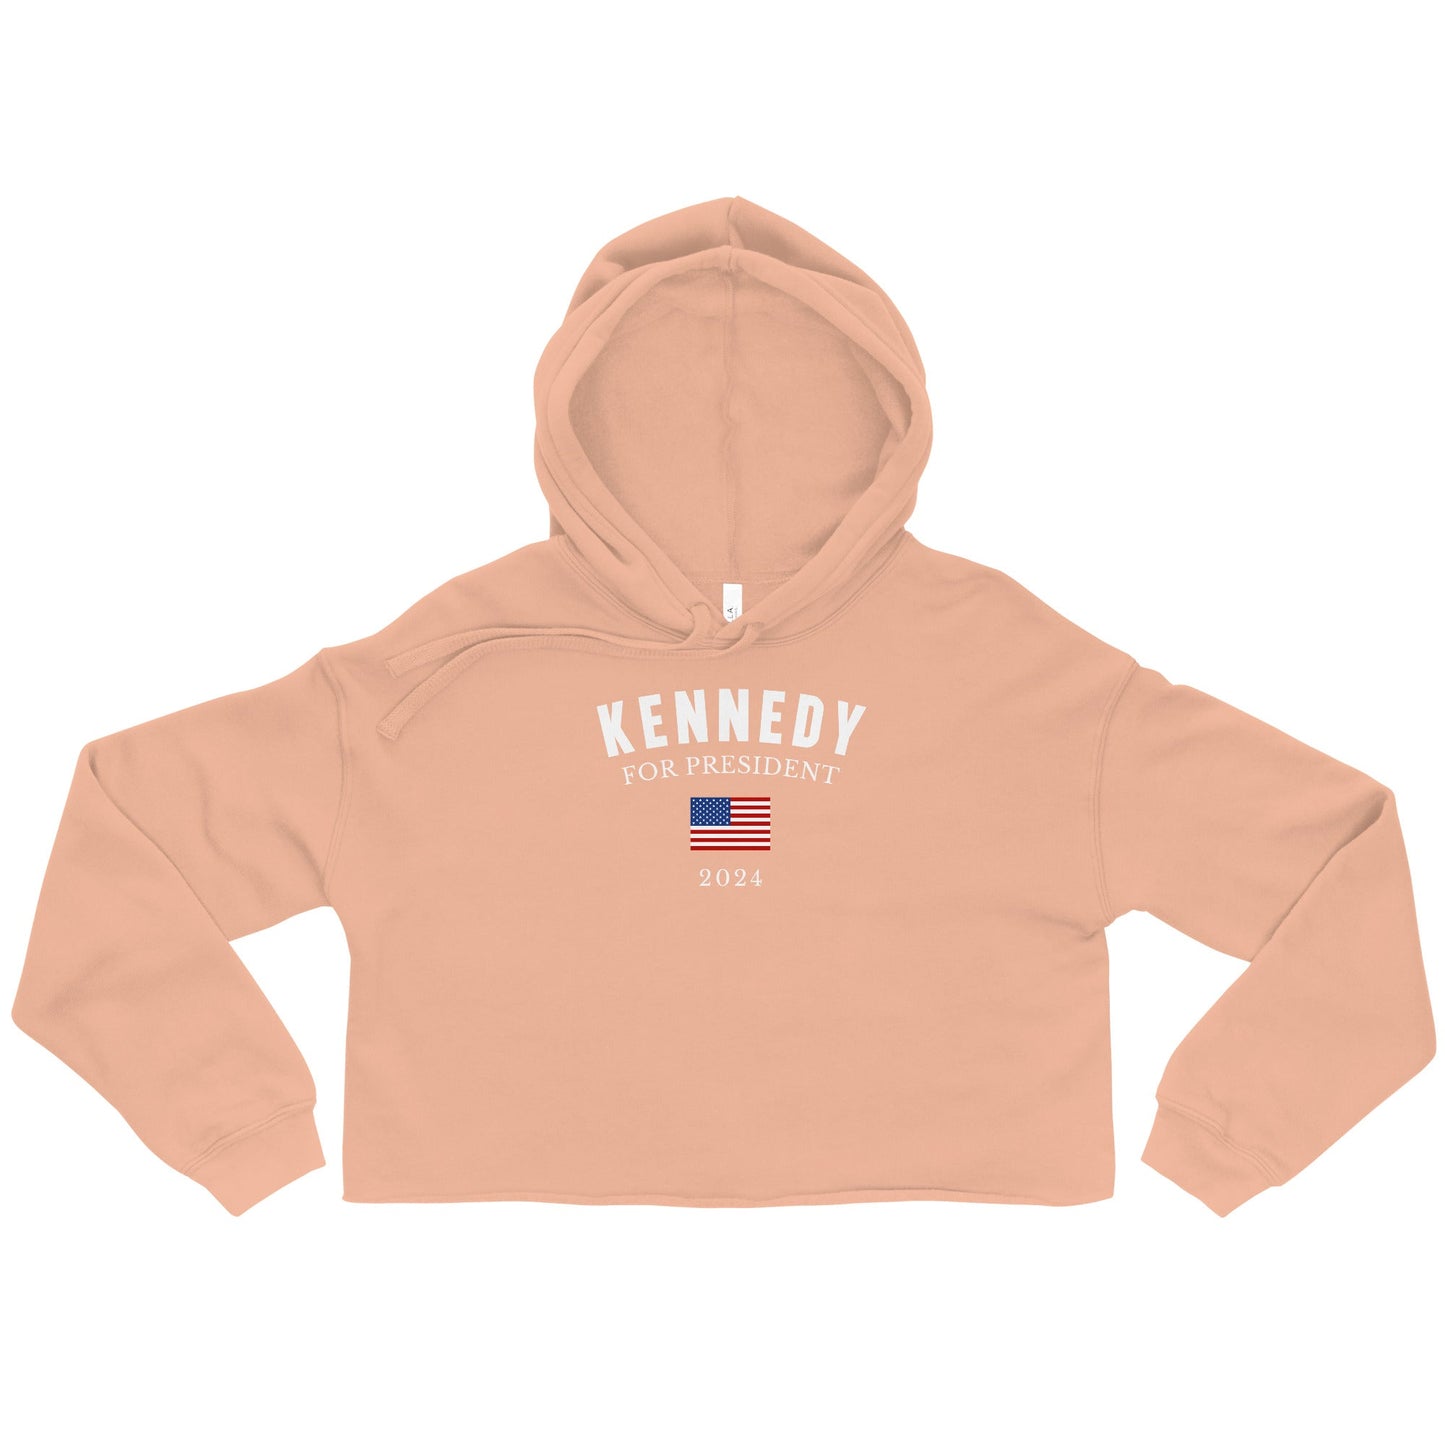 Kennedy for President Flag Crop Hoodie - TEAM KENNEDY. All rights reserved